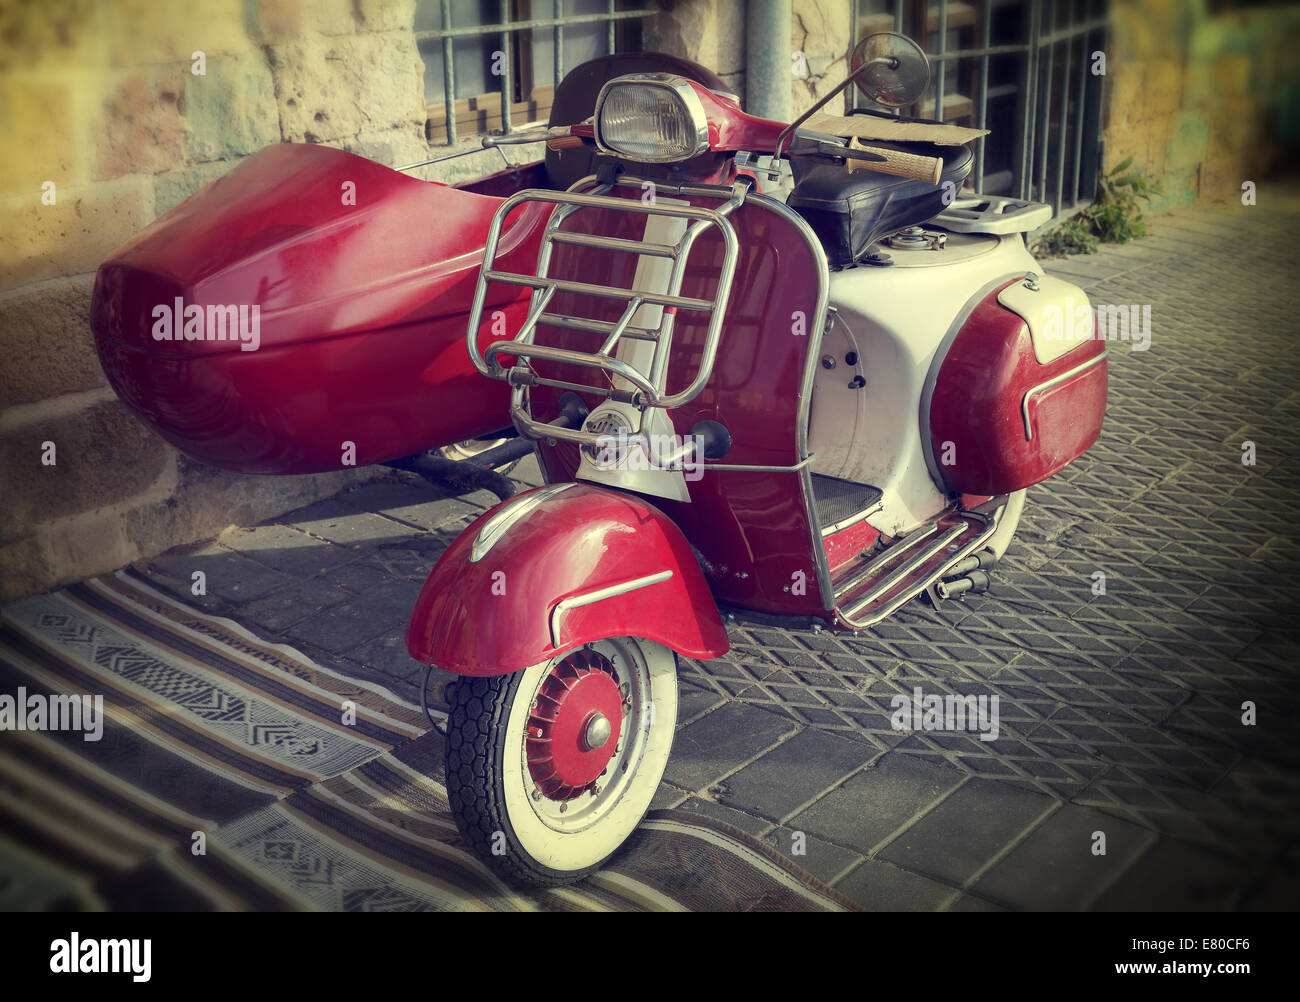 old scooter with sidecar in retro style Stock Photo